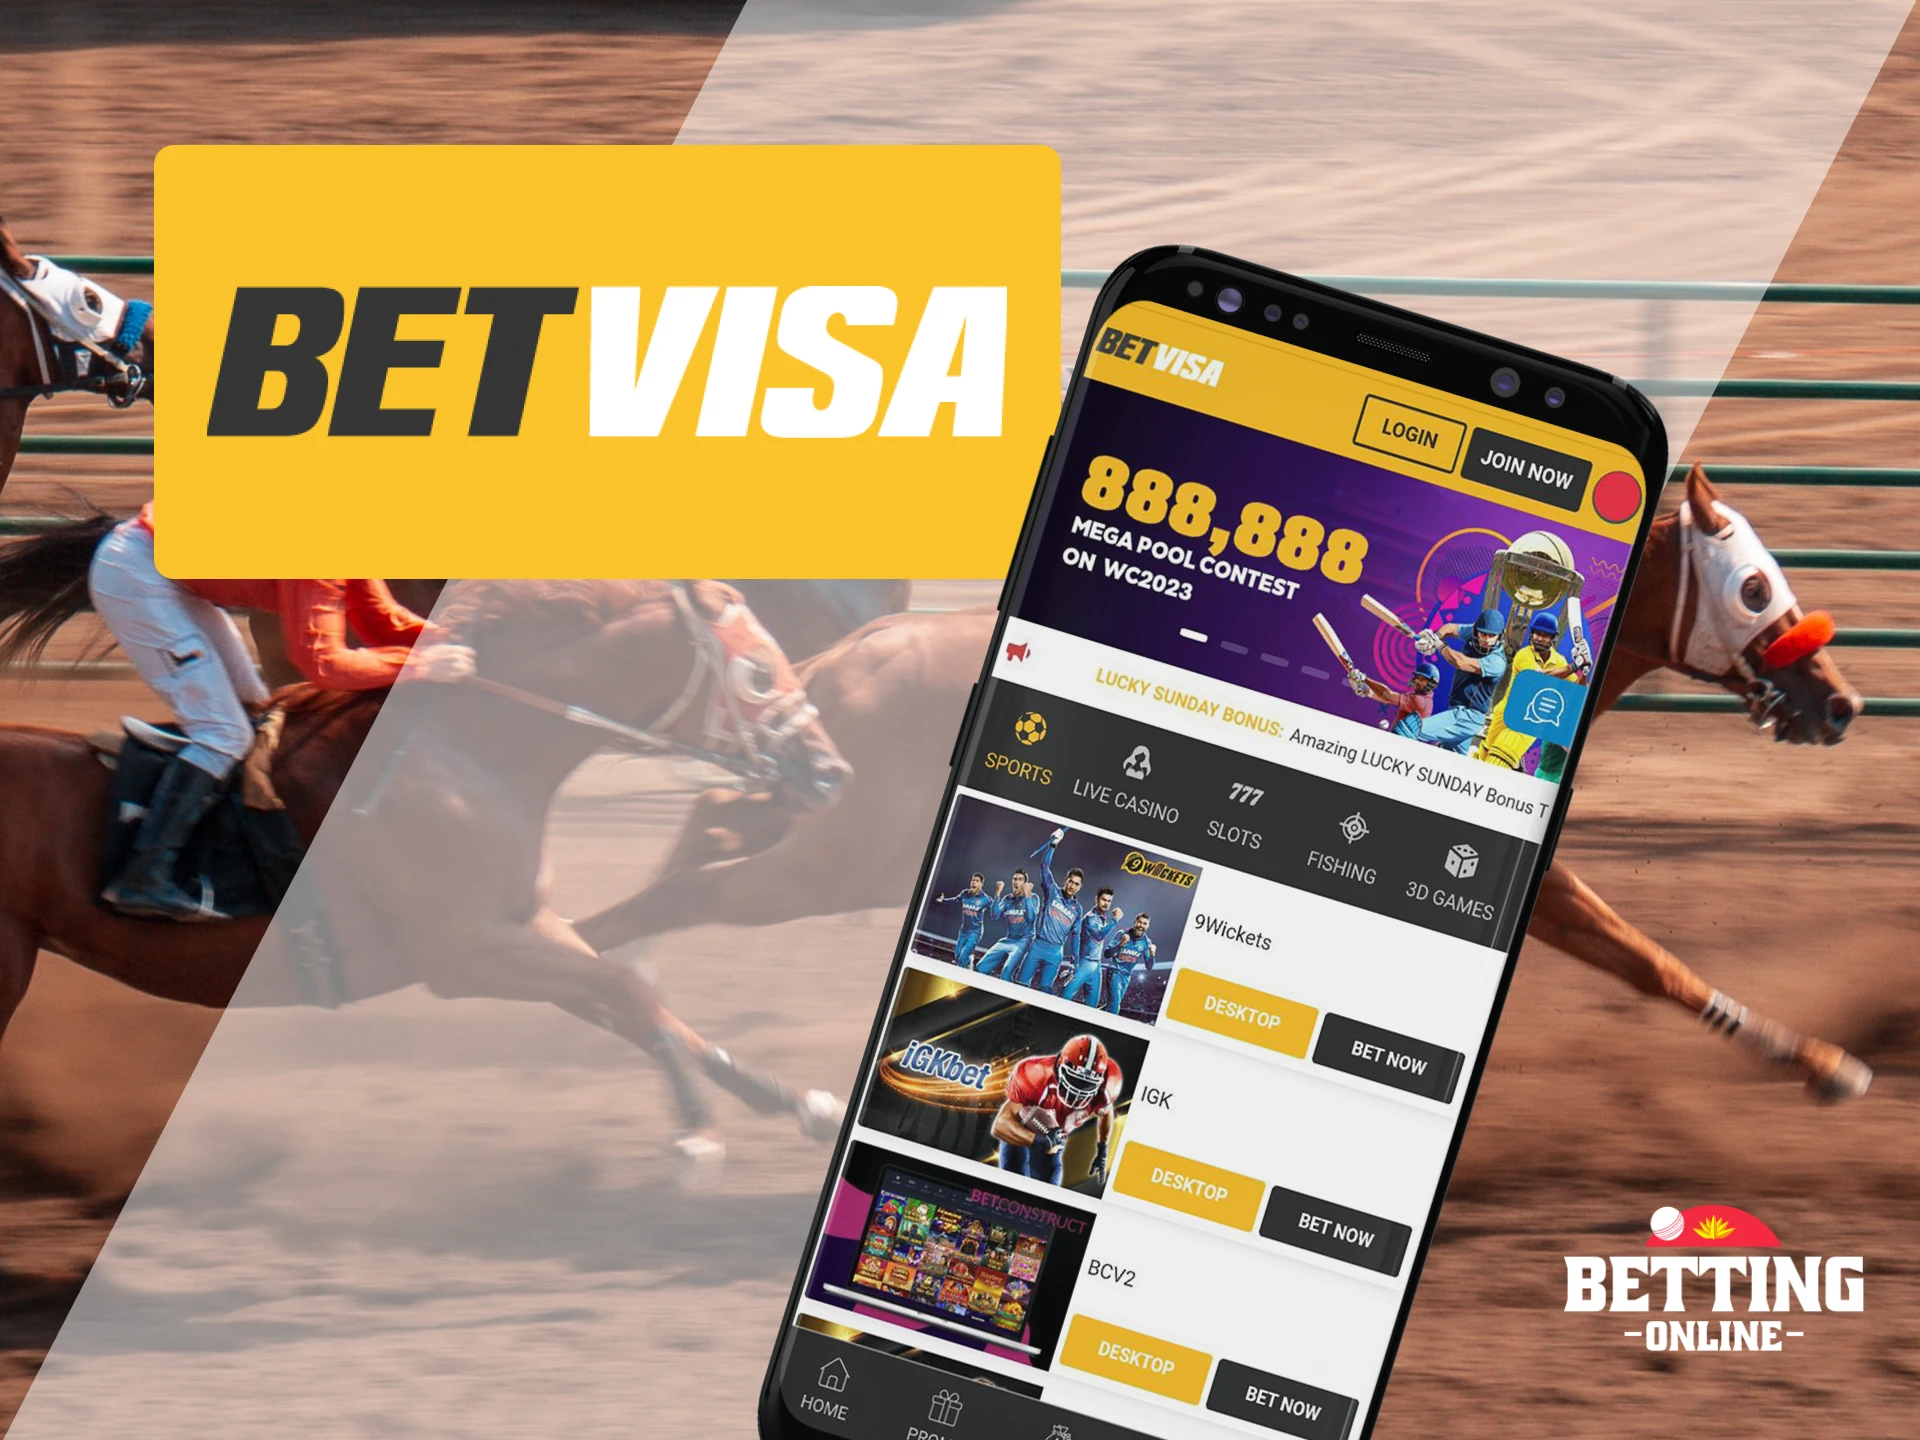 Betvisa app offers exciting betting on horse racing.